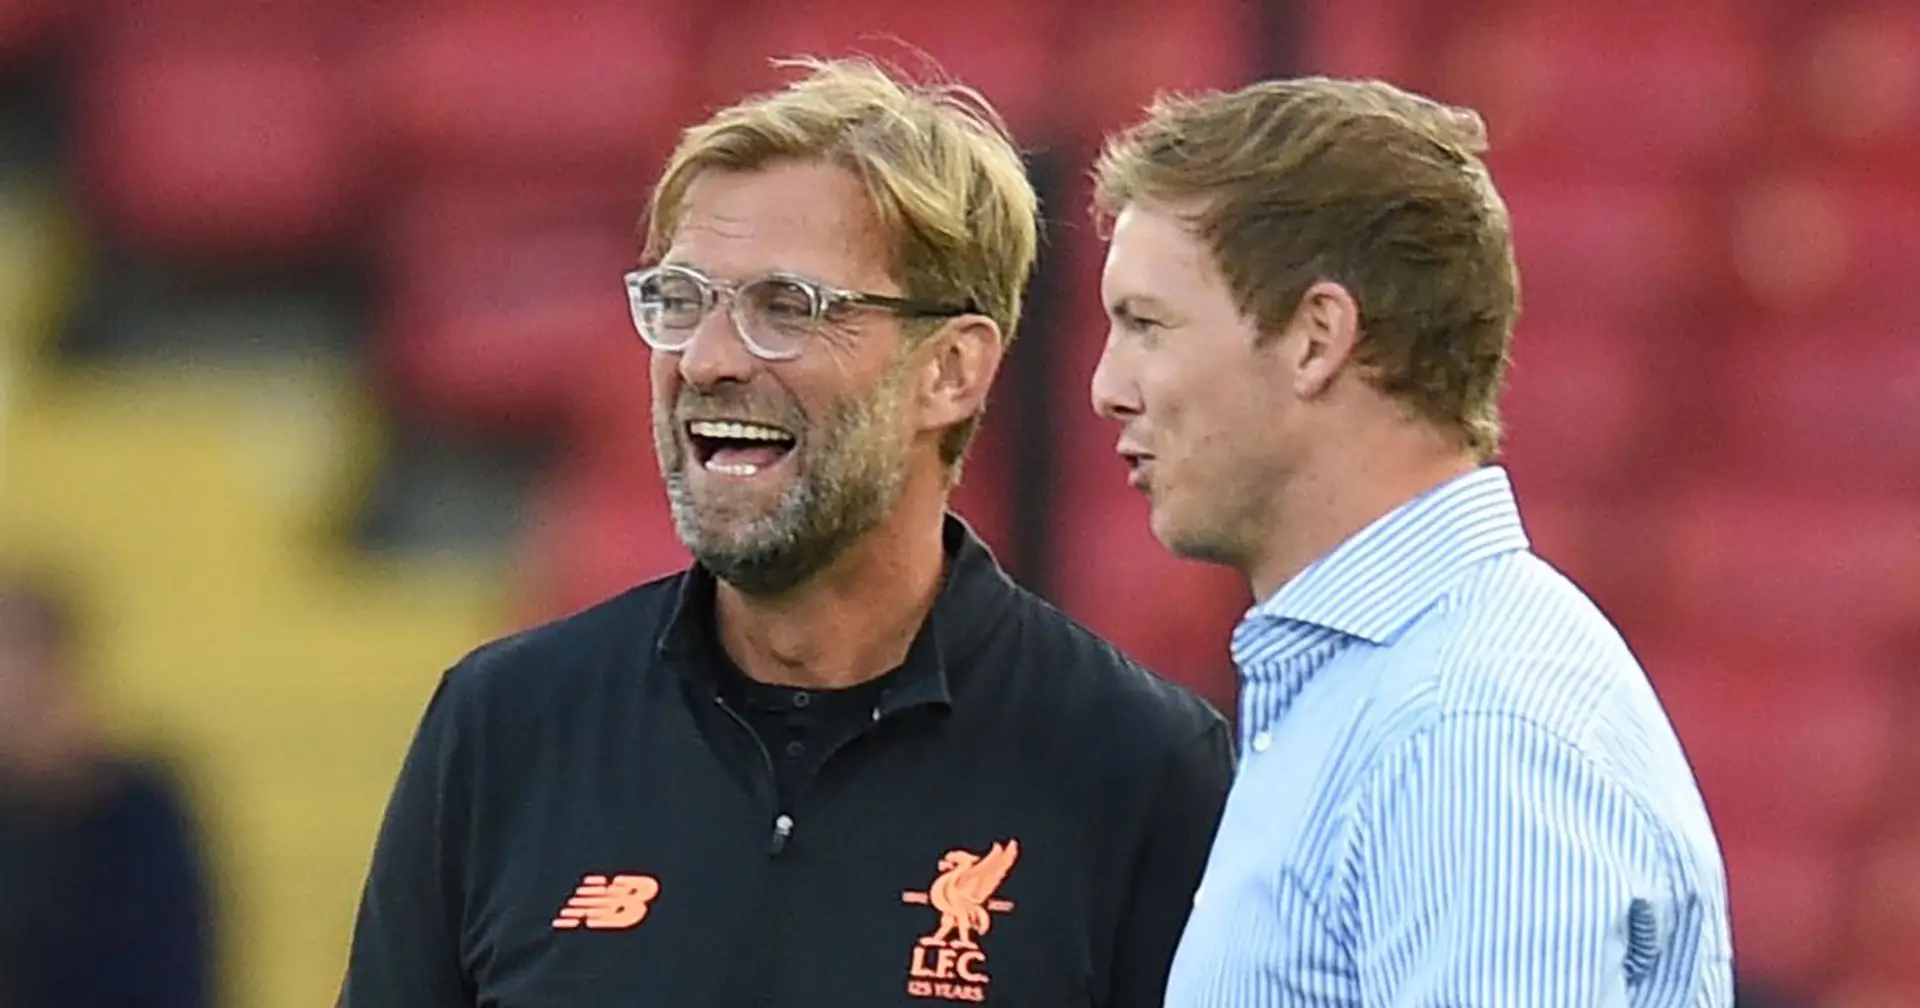 'Klopp has the gift': Nagelsmann expects strong Liverpool showing in Champions League despite league woes